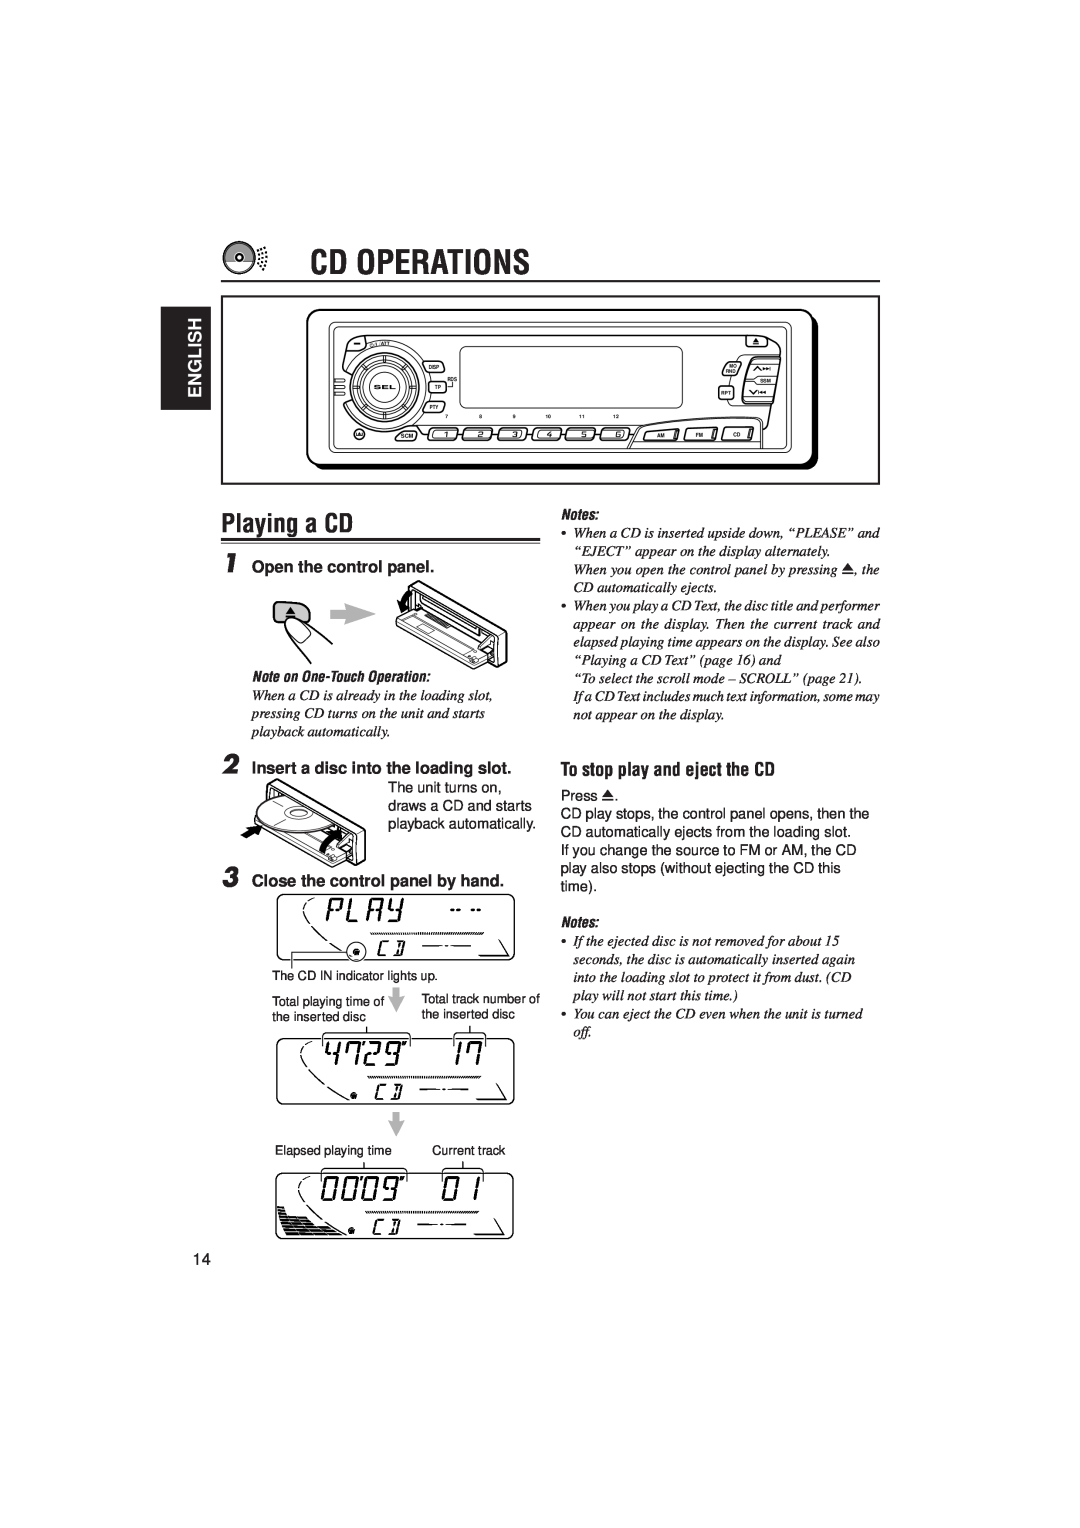 JVC KD-S9R manual Cd Operations, Playing a CD, To stop play and eject the CD, English, Note on One-TouchOperation, Notes 